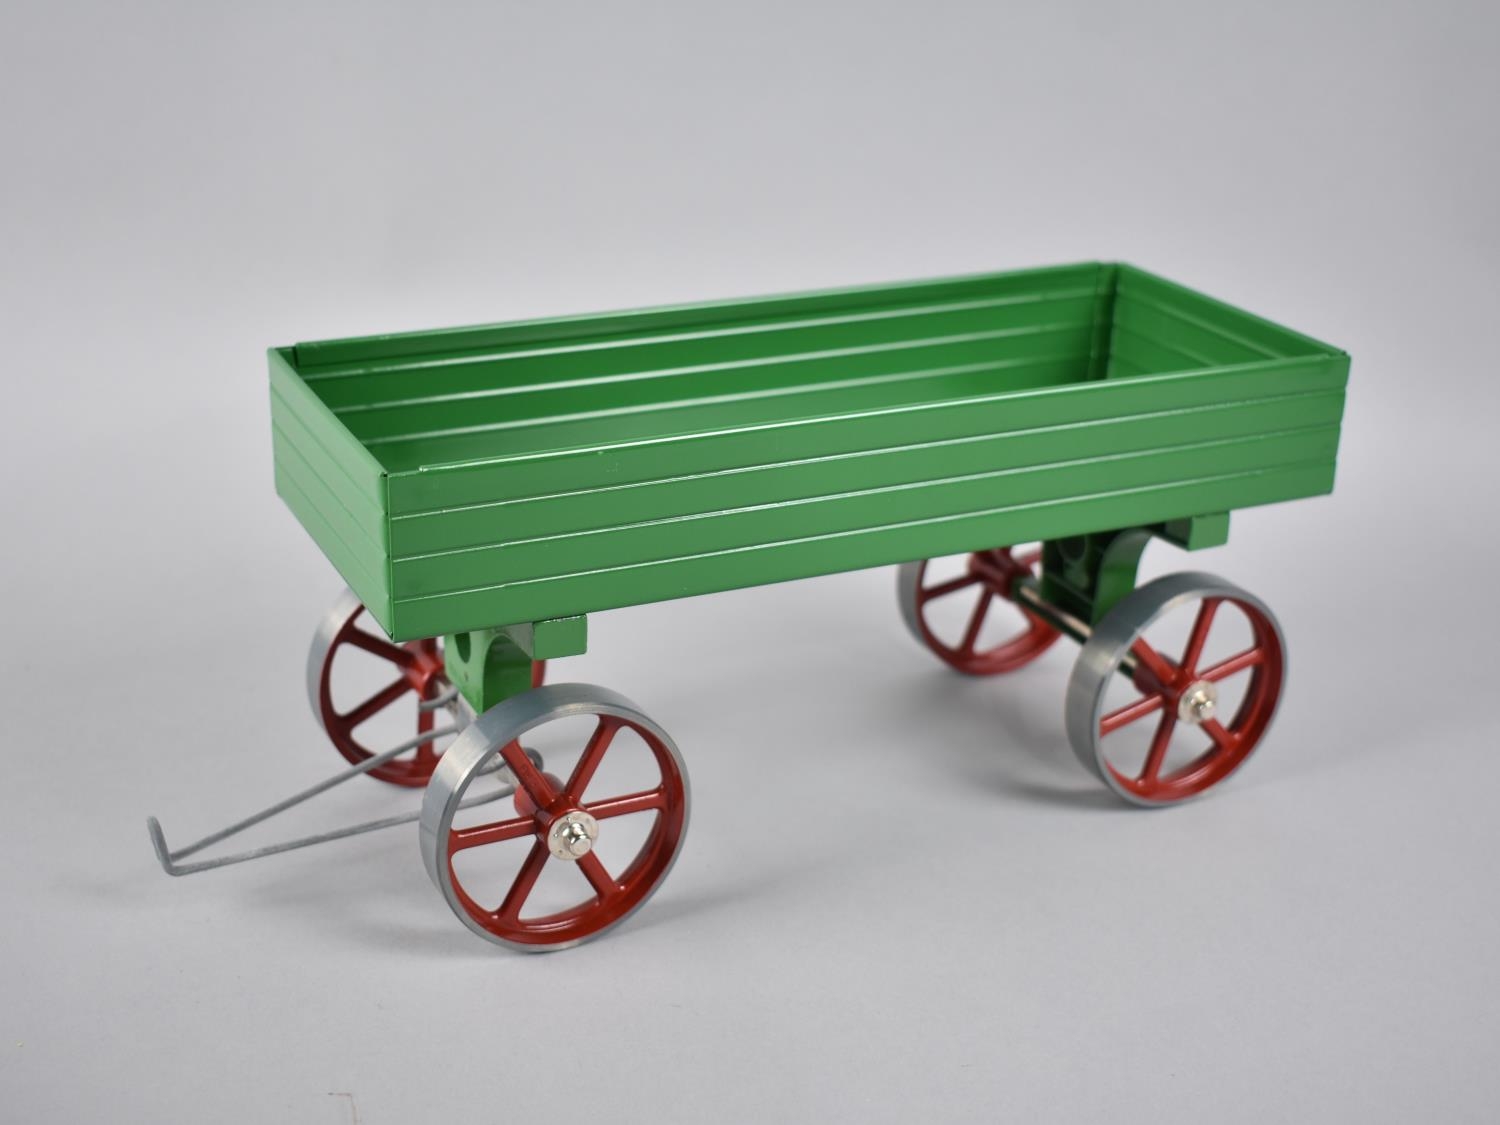 A Boxed Mamod Open Wagon - Image 2 of 3